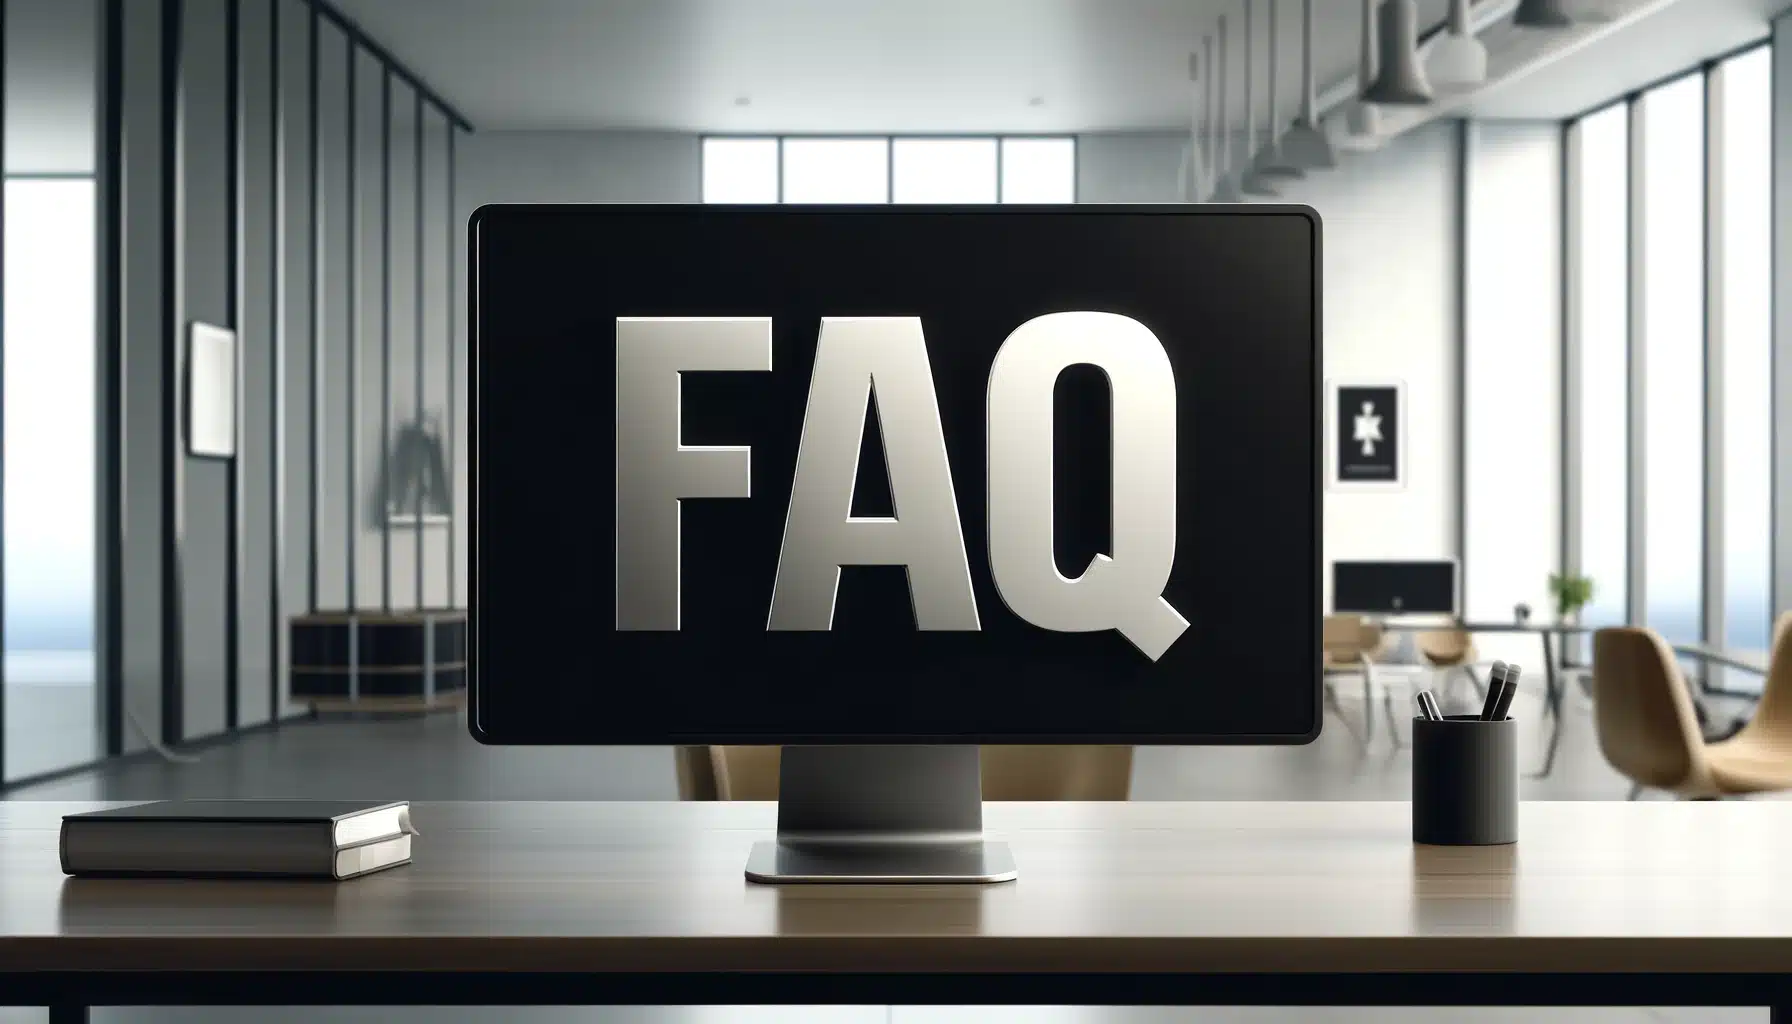 A large monitor screen prominently displaying the word 'FAQ' in bold, clean typography. The monitor is set in a modern, minimalist office environment with a sleek desk and minimal clutter.